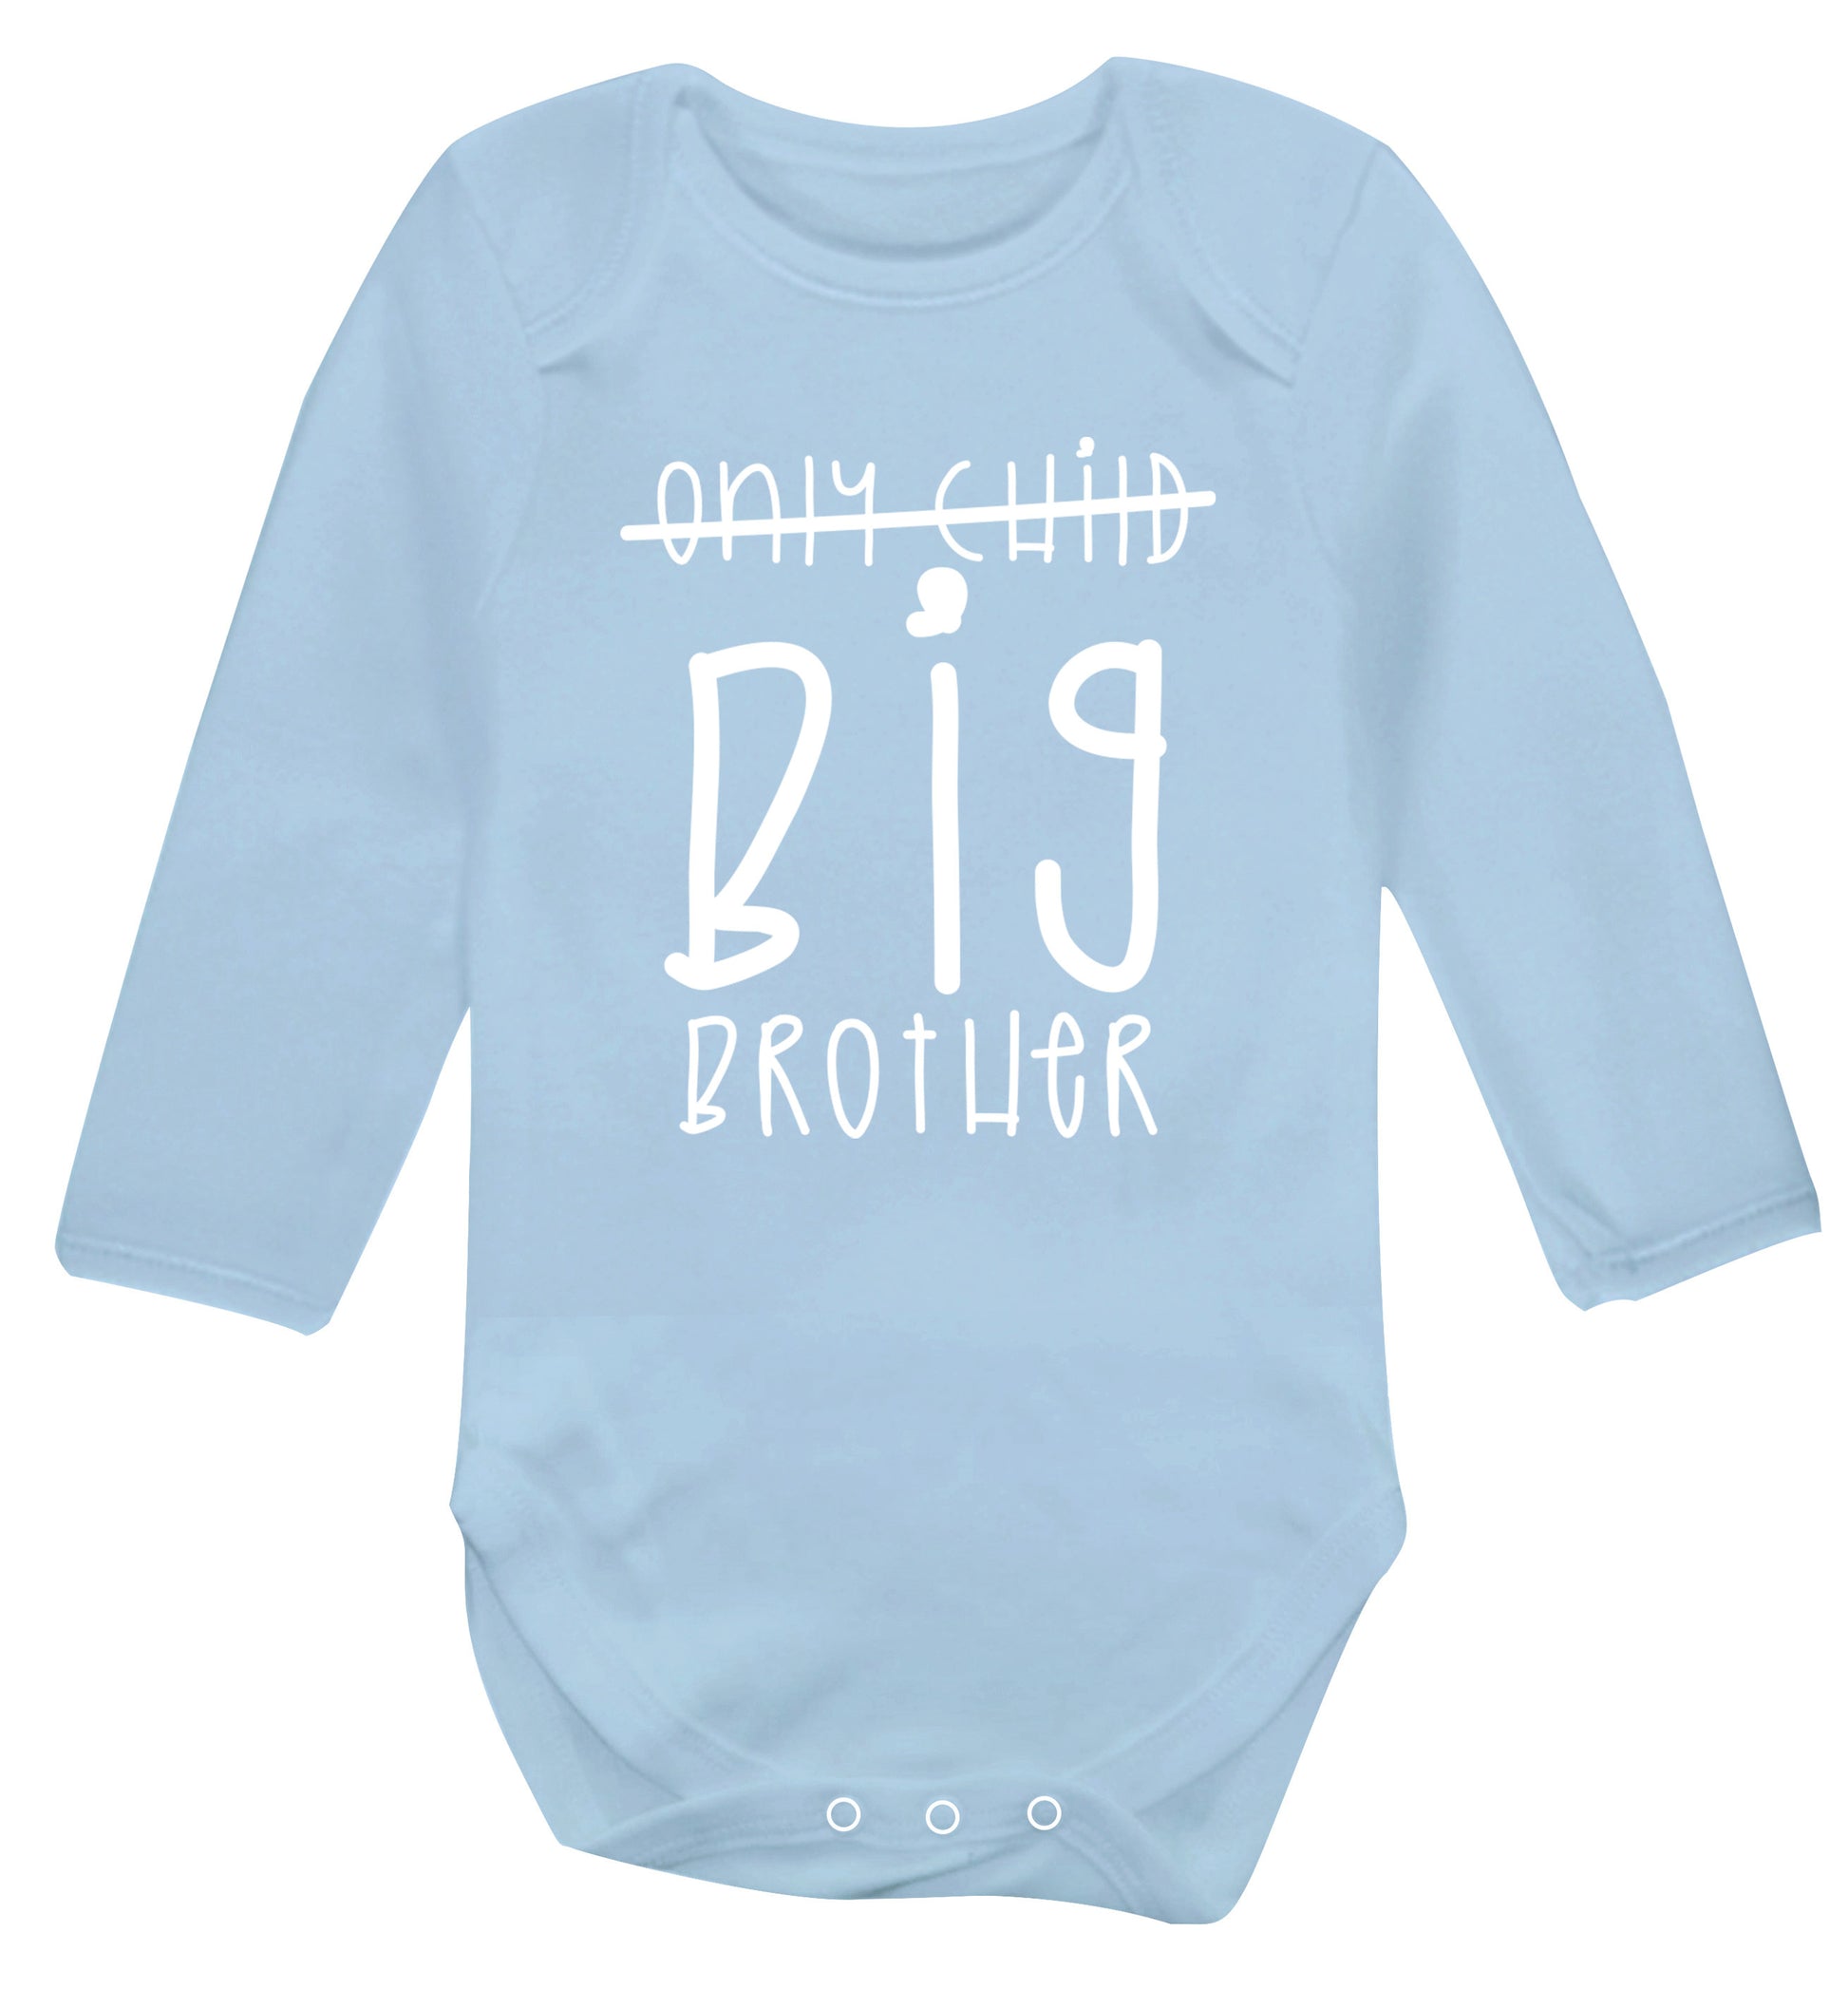 Only child big brother Baby Vest long sleeved pale blue 6-12 months